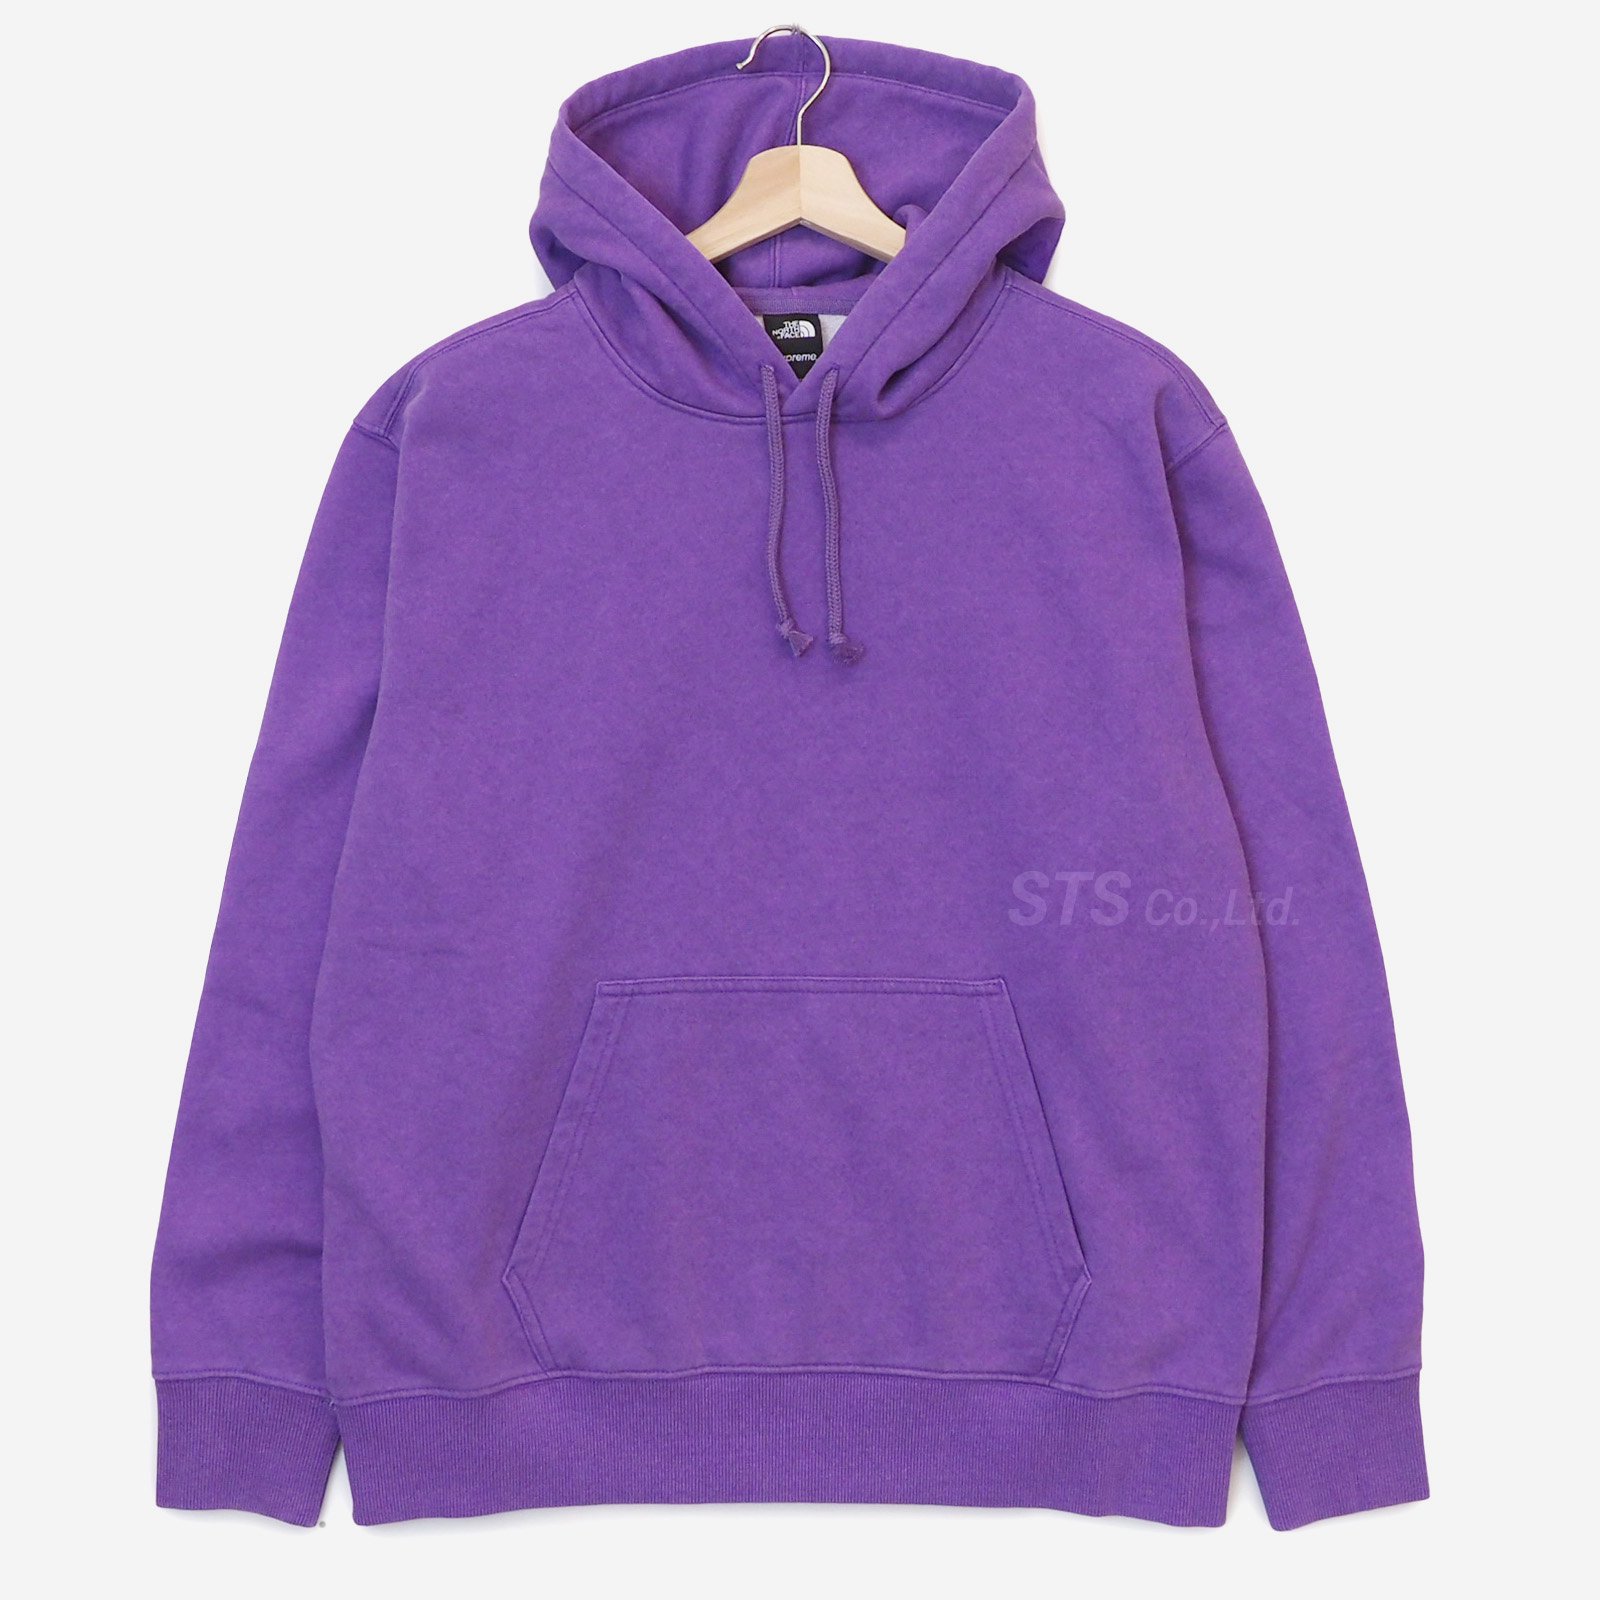 Supreme/The North Face Pigment Printed Hooded Sweatshirt - ParkSIDER